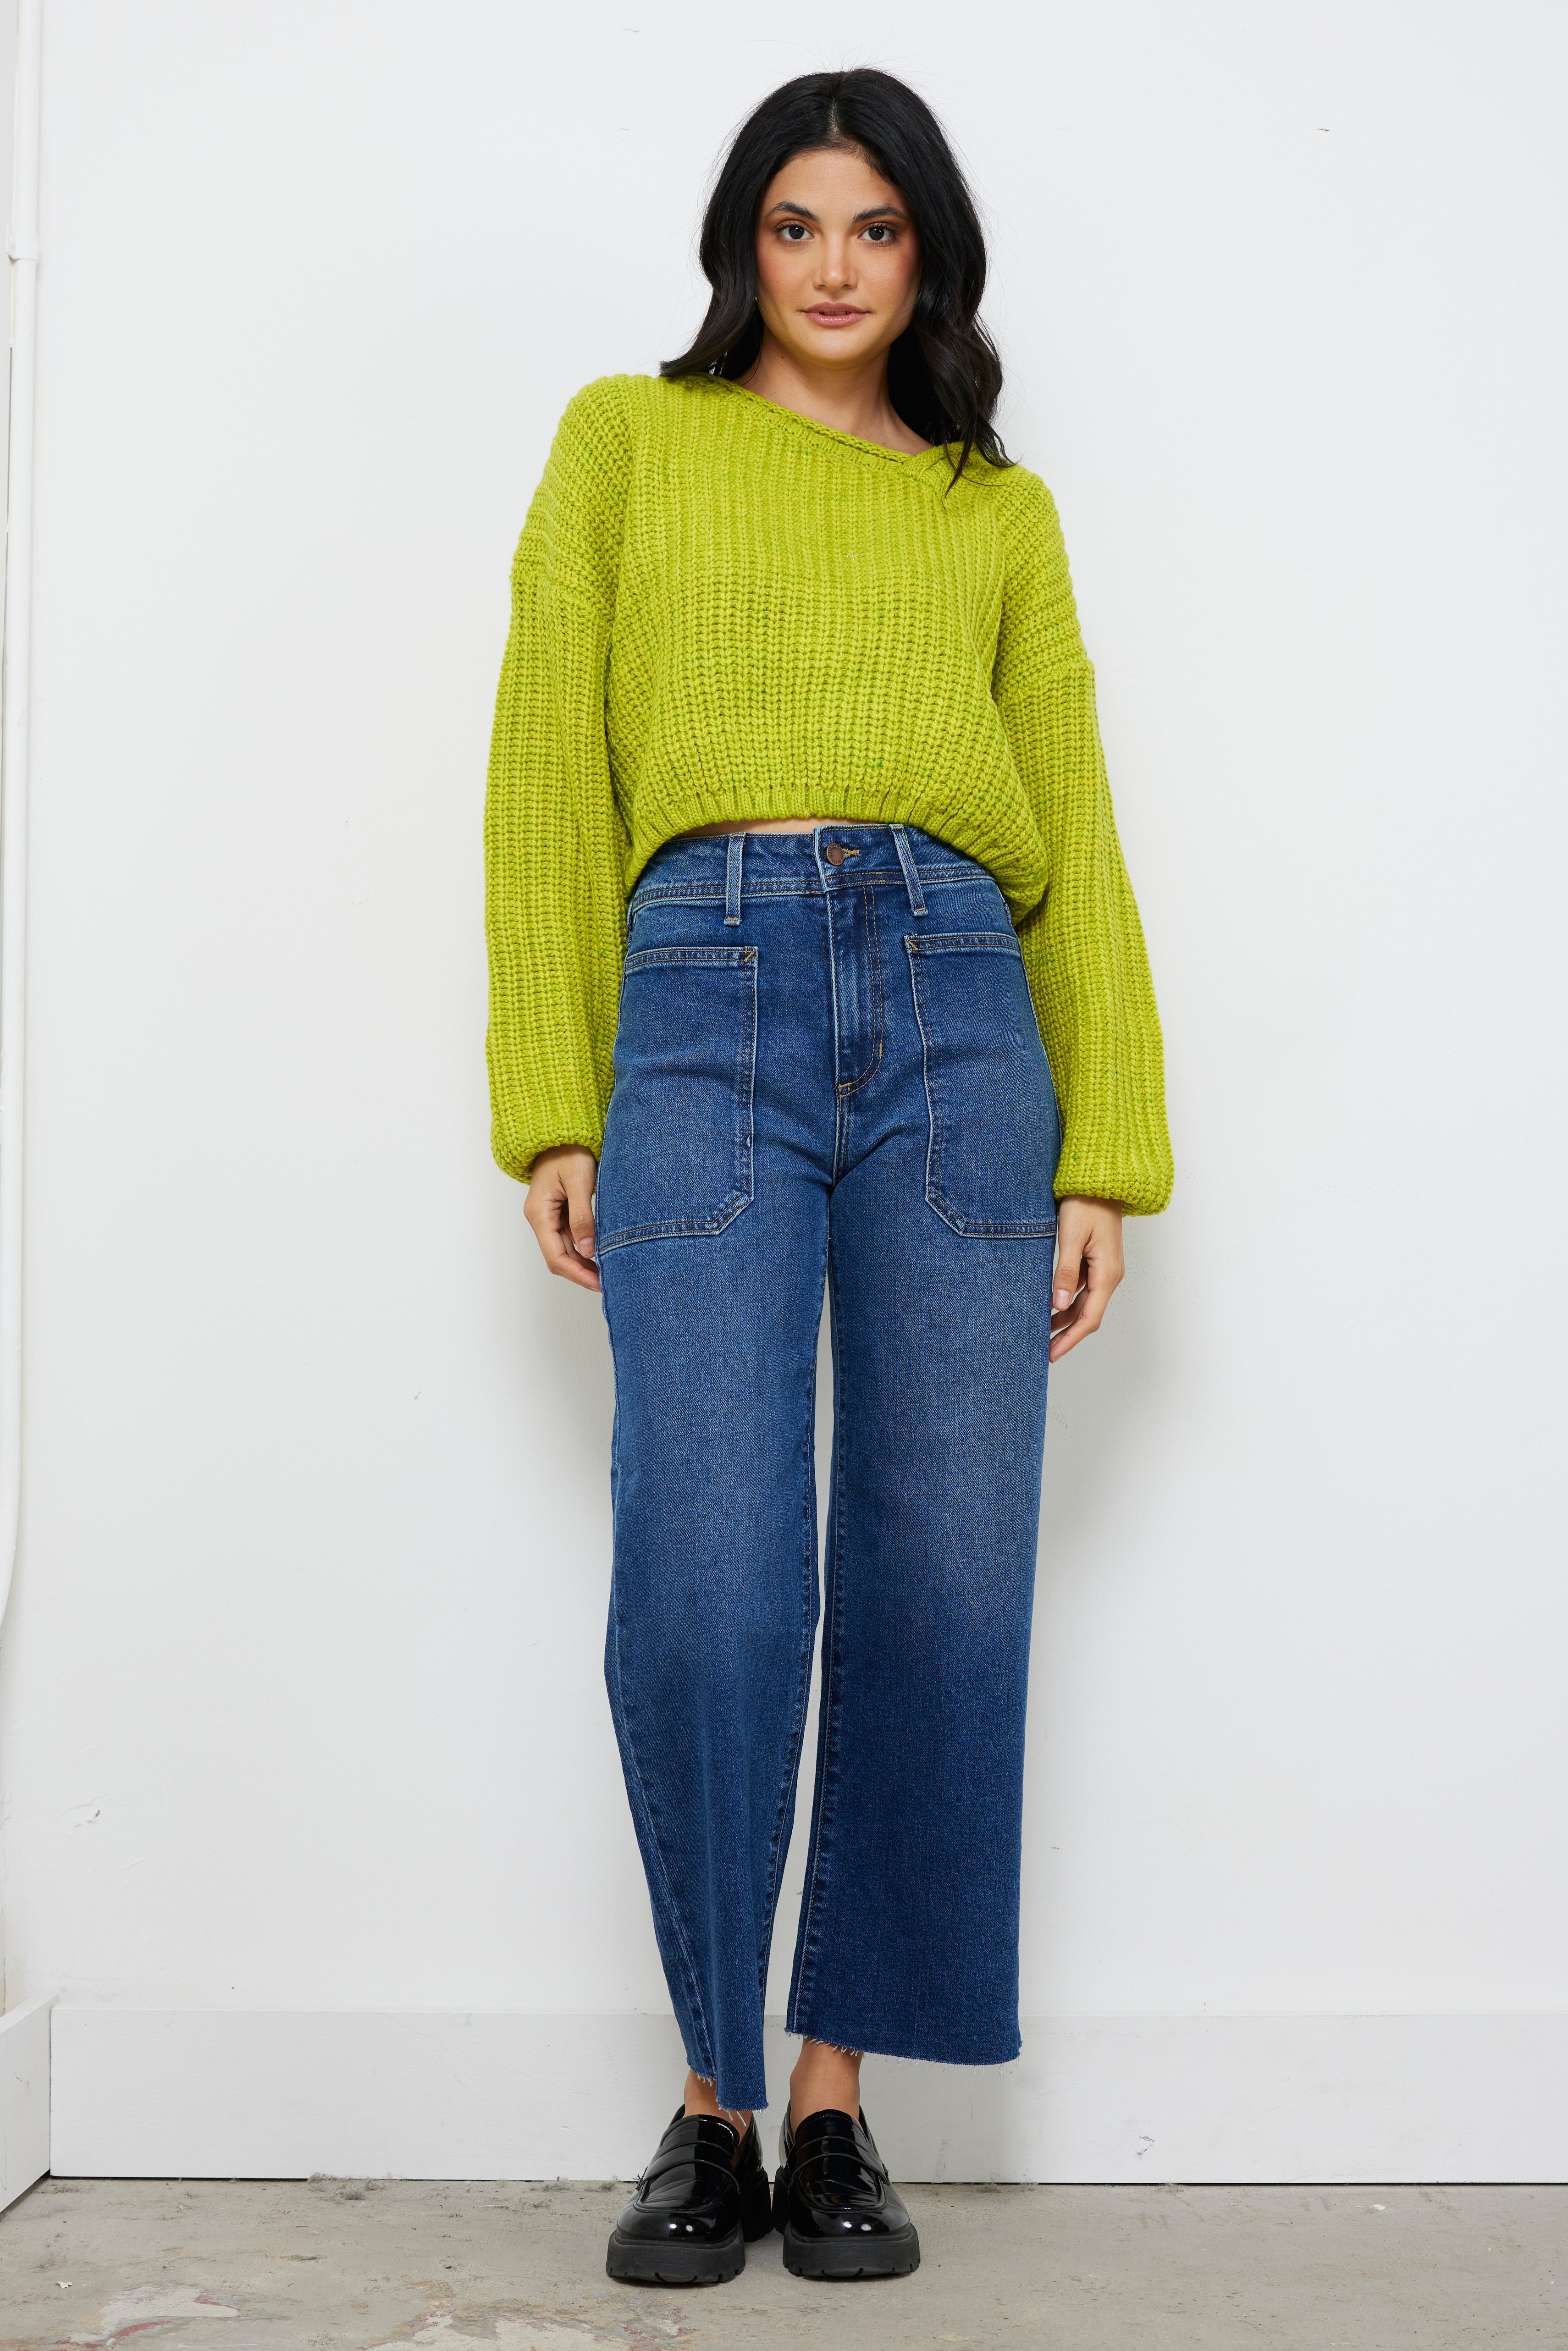 Keep It Interesting Lime Knit Top